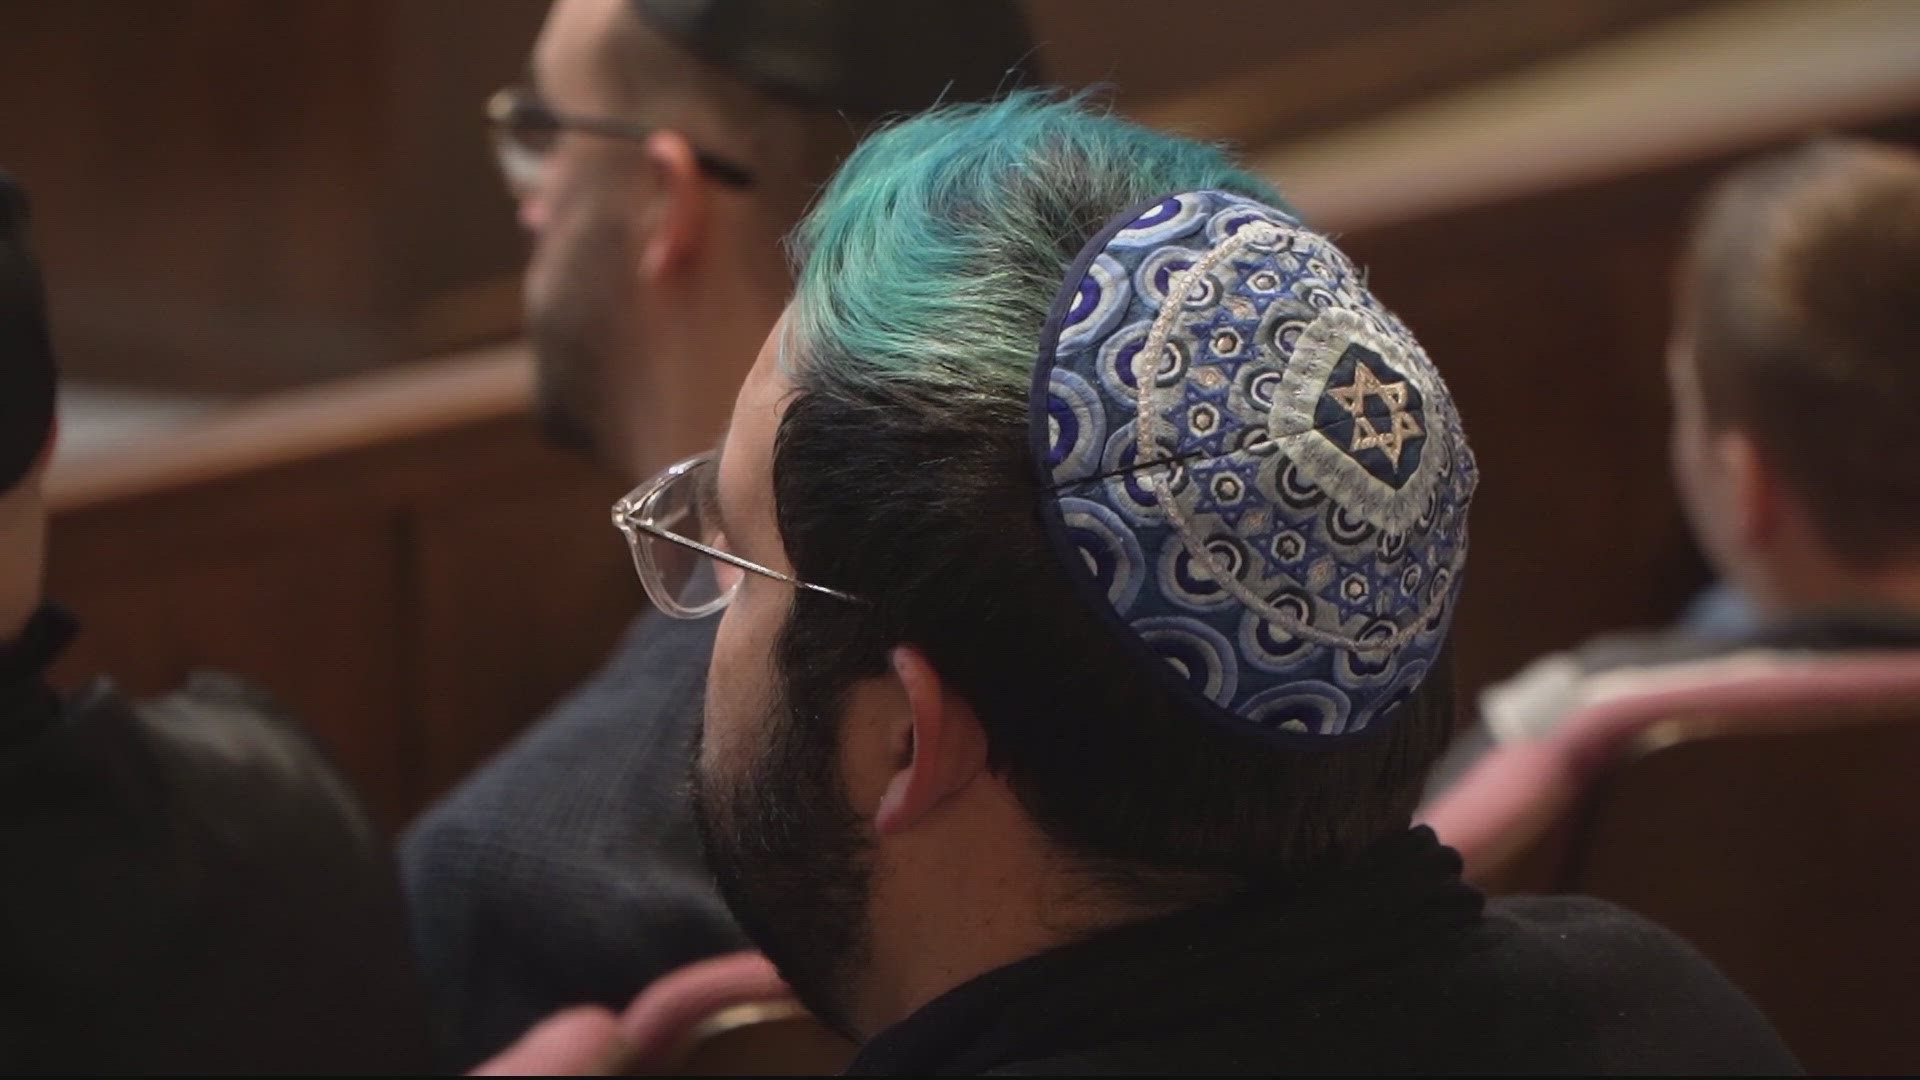 "I have extended family who you know took me in when I was in seminary there and we've reached out but haven't heard back yet," said Rabbi Eliana Fischel.